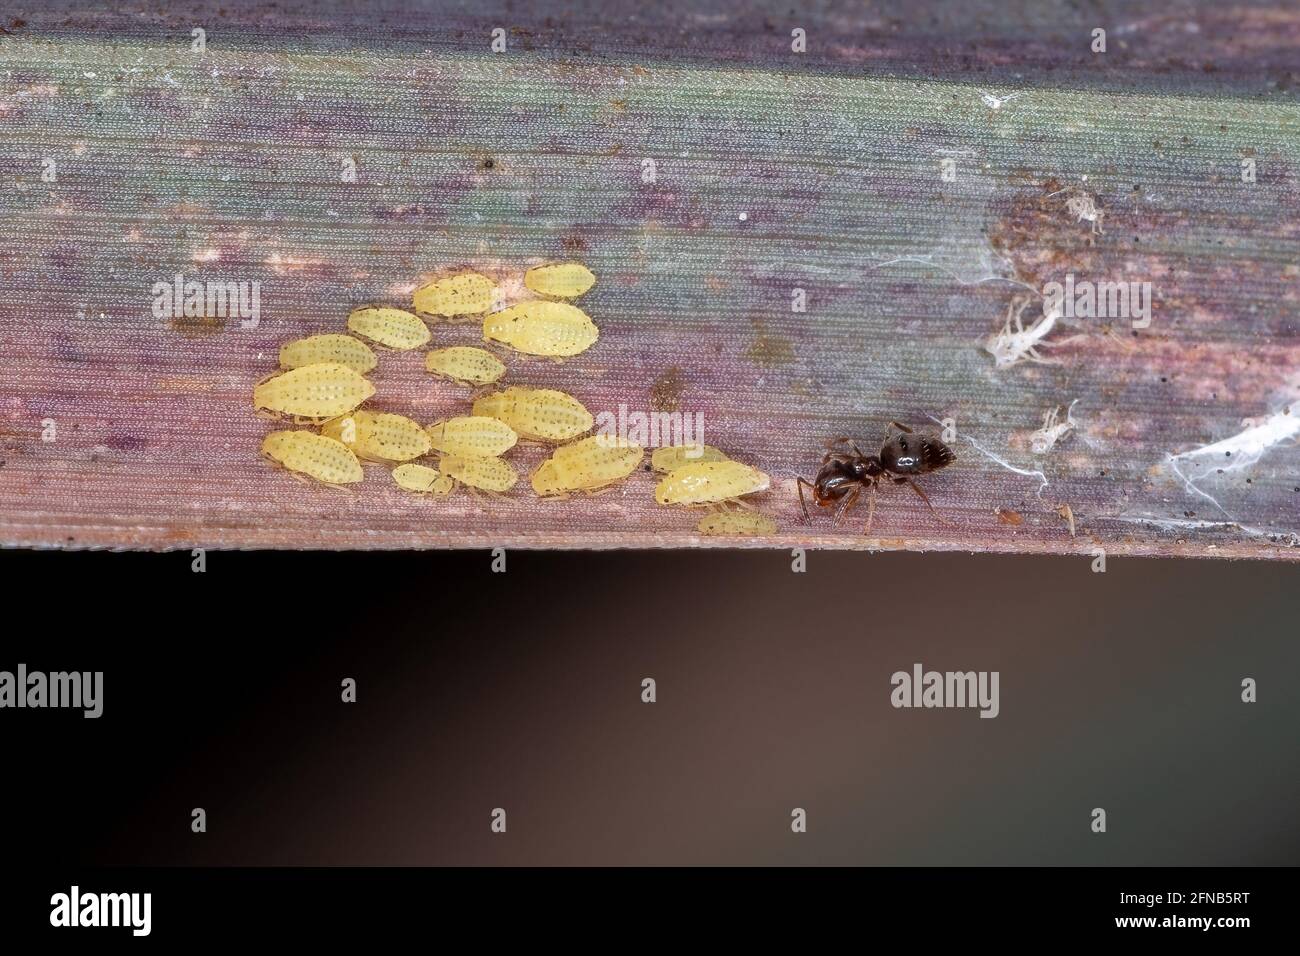 Small yellow aphids nymphs of the species Sipha flava eating a Lemon Grass leaf of the species Cymbopogon citratus while they are protected by rover a Stock Photo